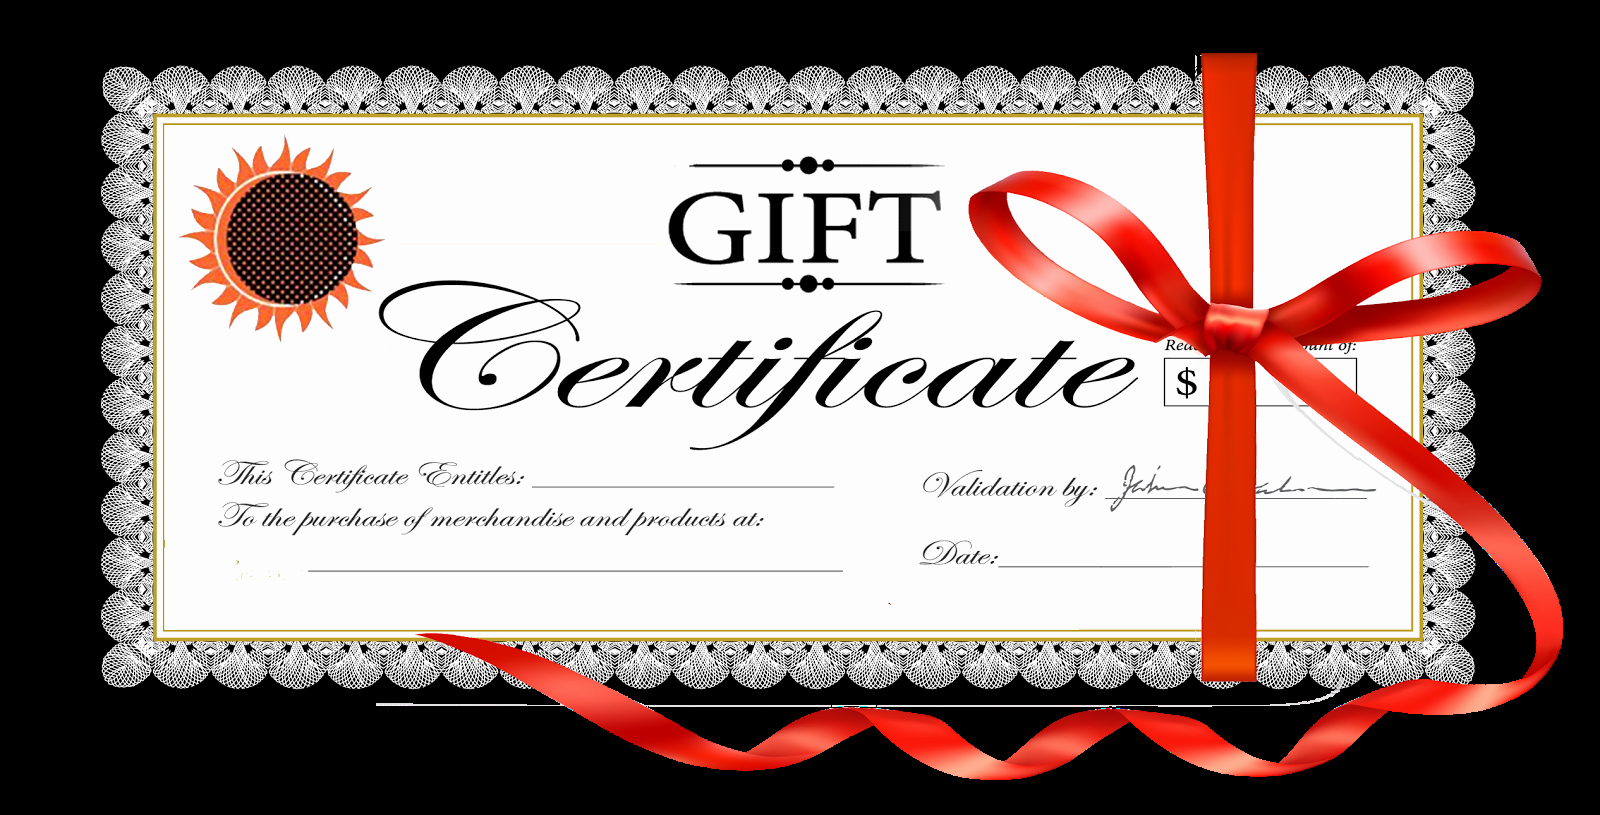 Dance Certificate Templates for Word Luxury 18 Gift Certificate Templates Excel Pdf formats